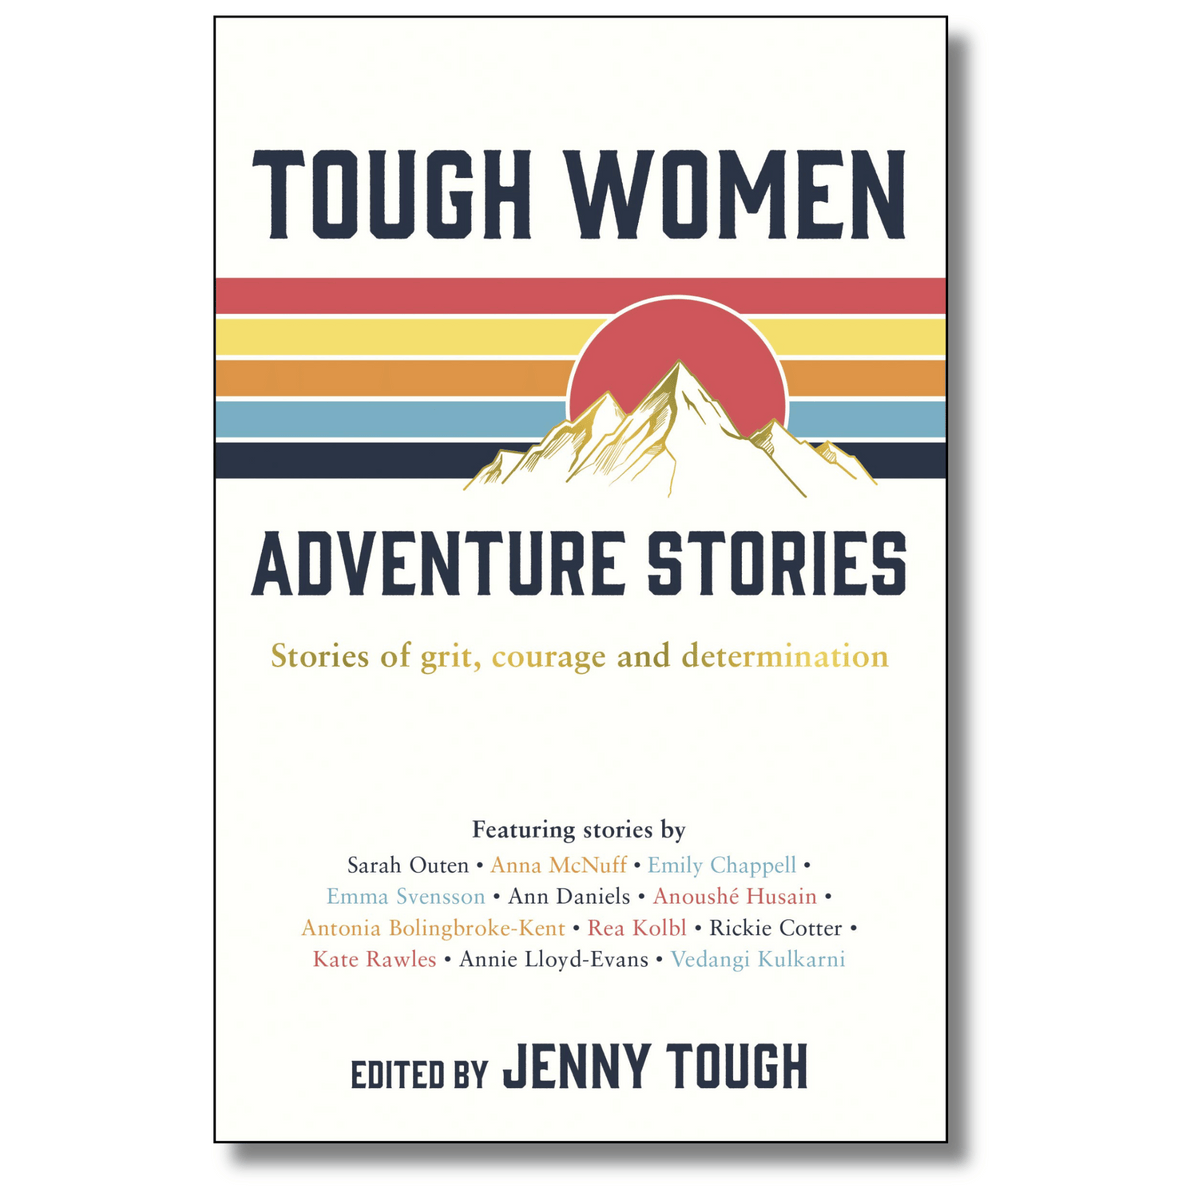 Tough Women Adventure Stories; Stories of Grit, Courage, and